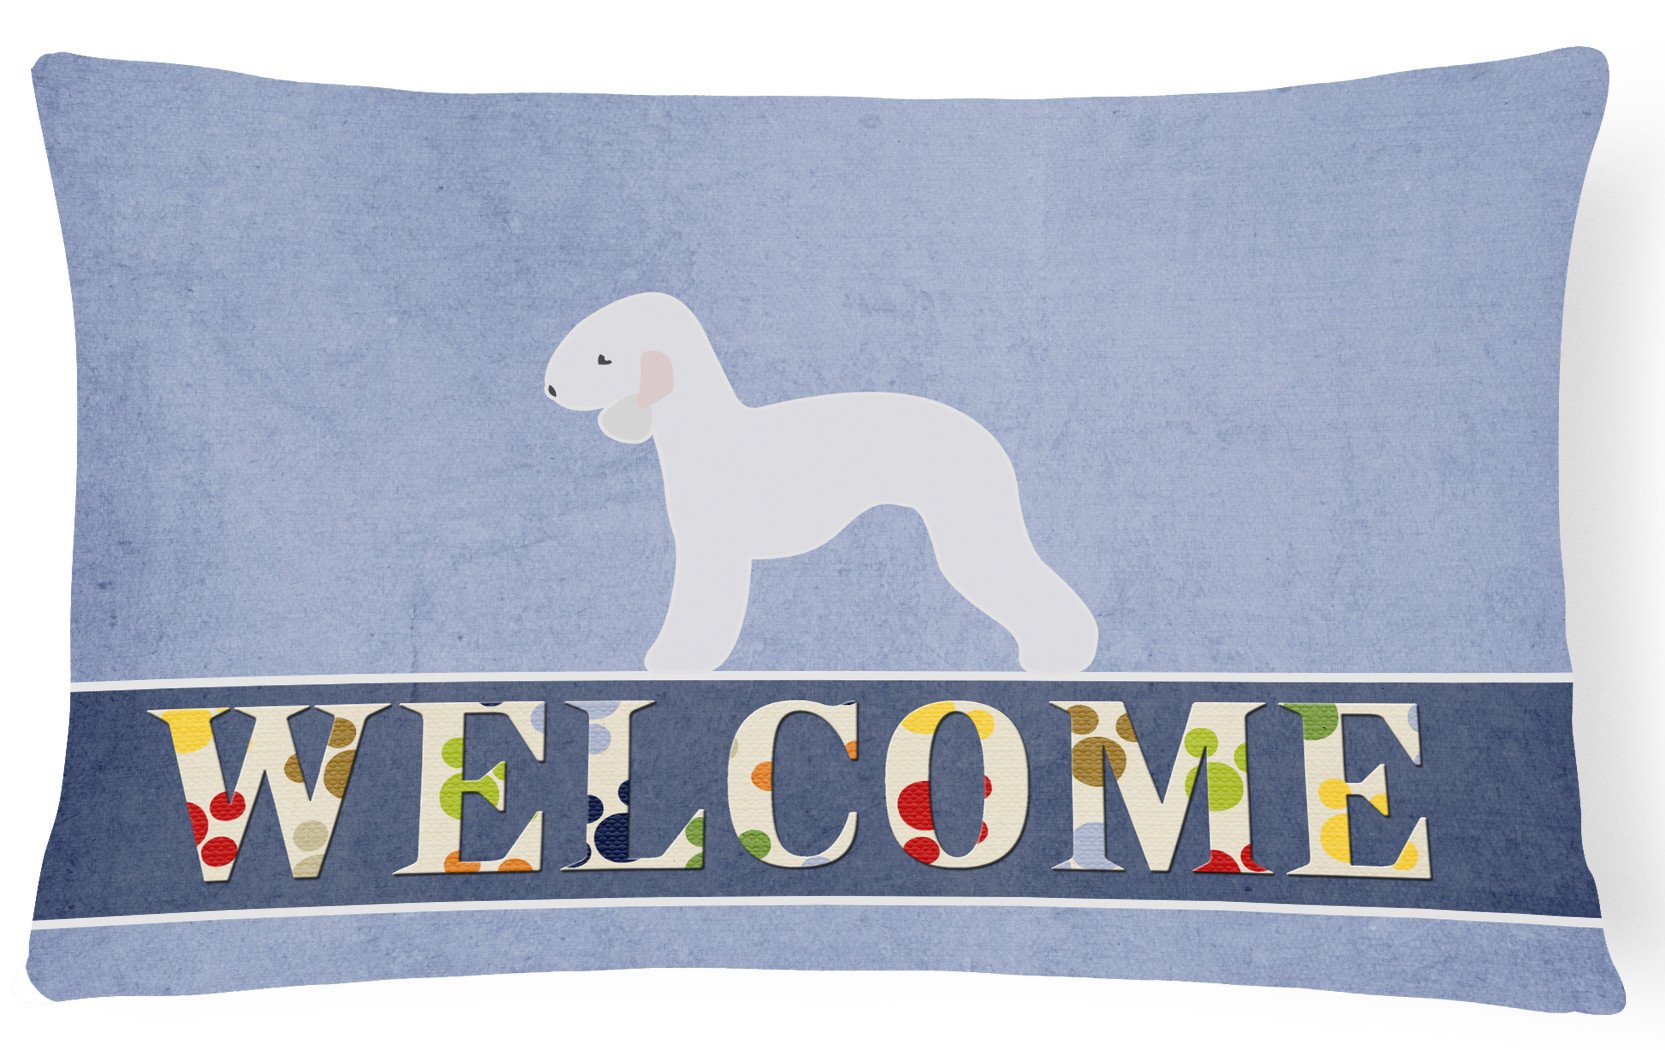 Bedlington Terrier Welcome Canvas Fabric Decorative Pillow BB5498PW1216 by Caroline's Treasures